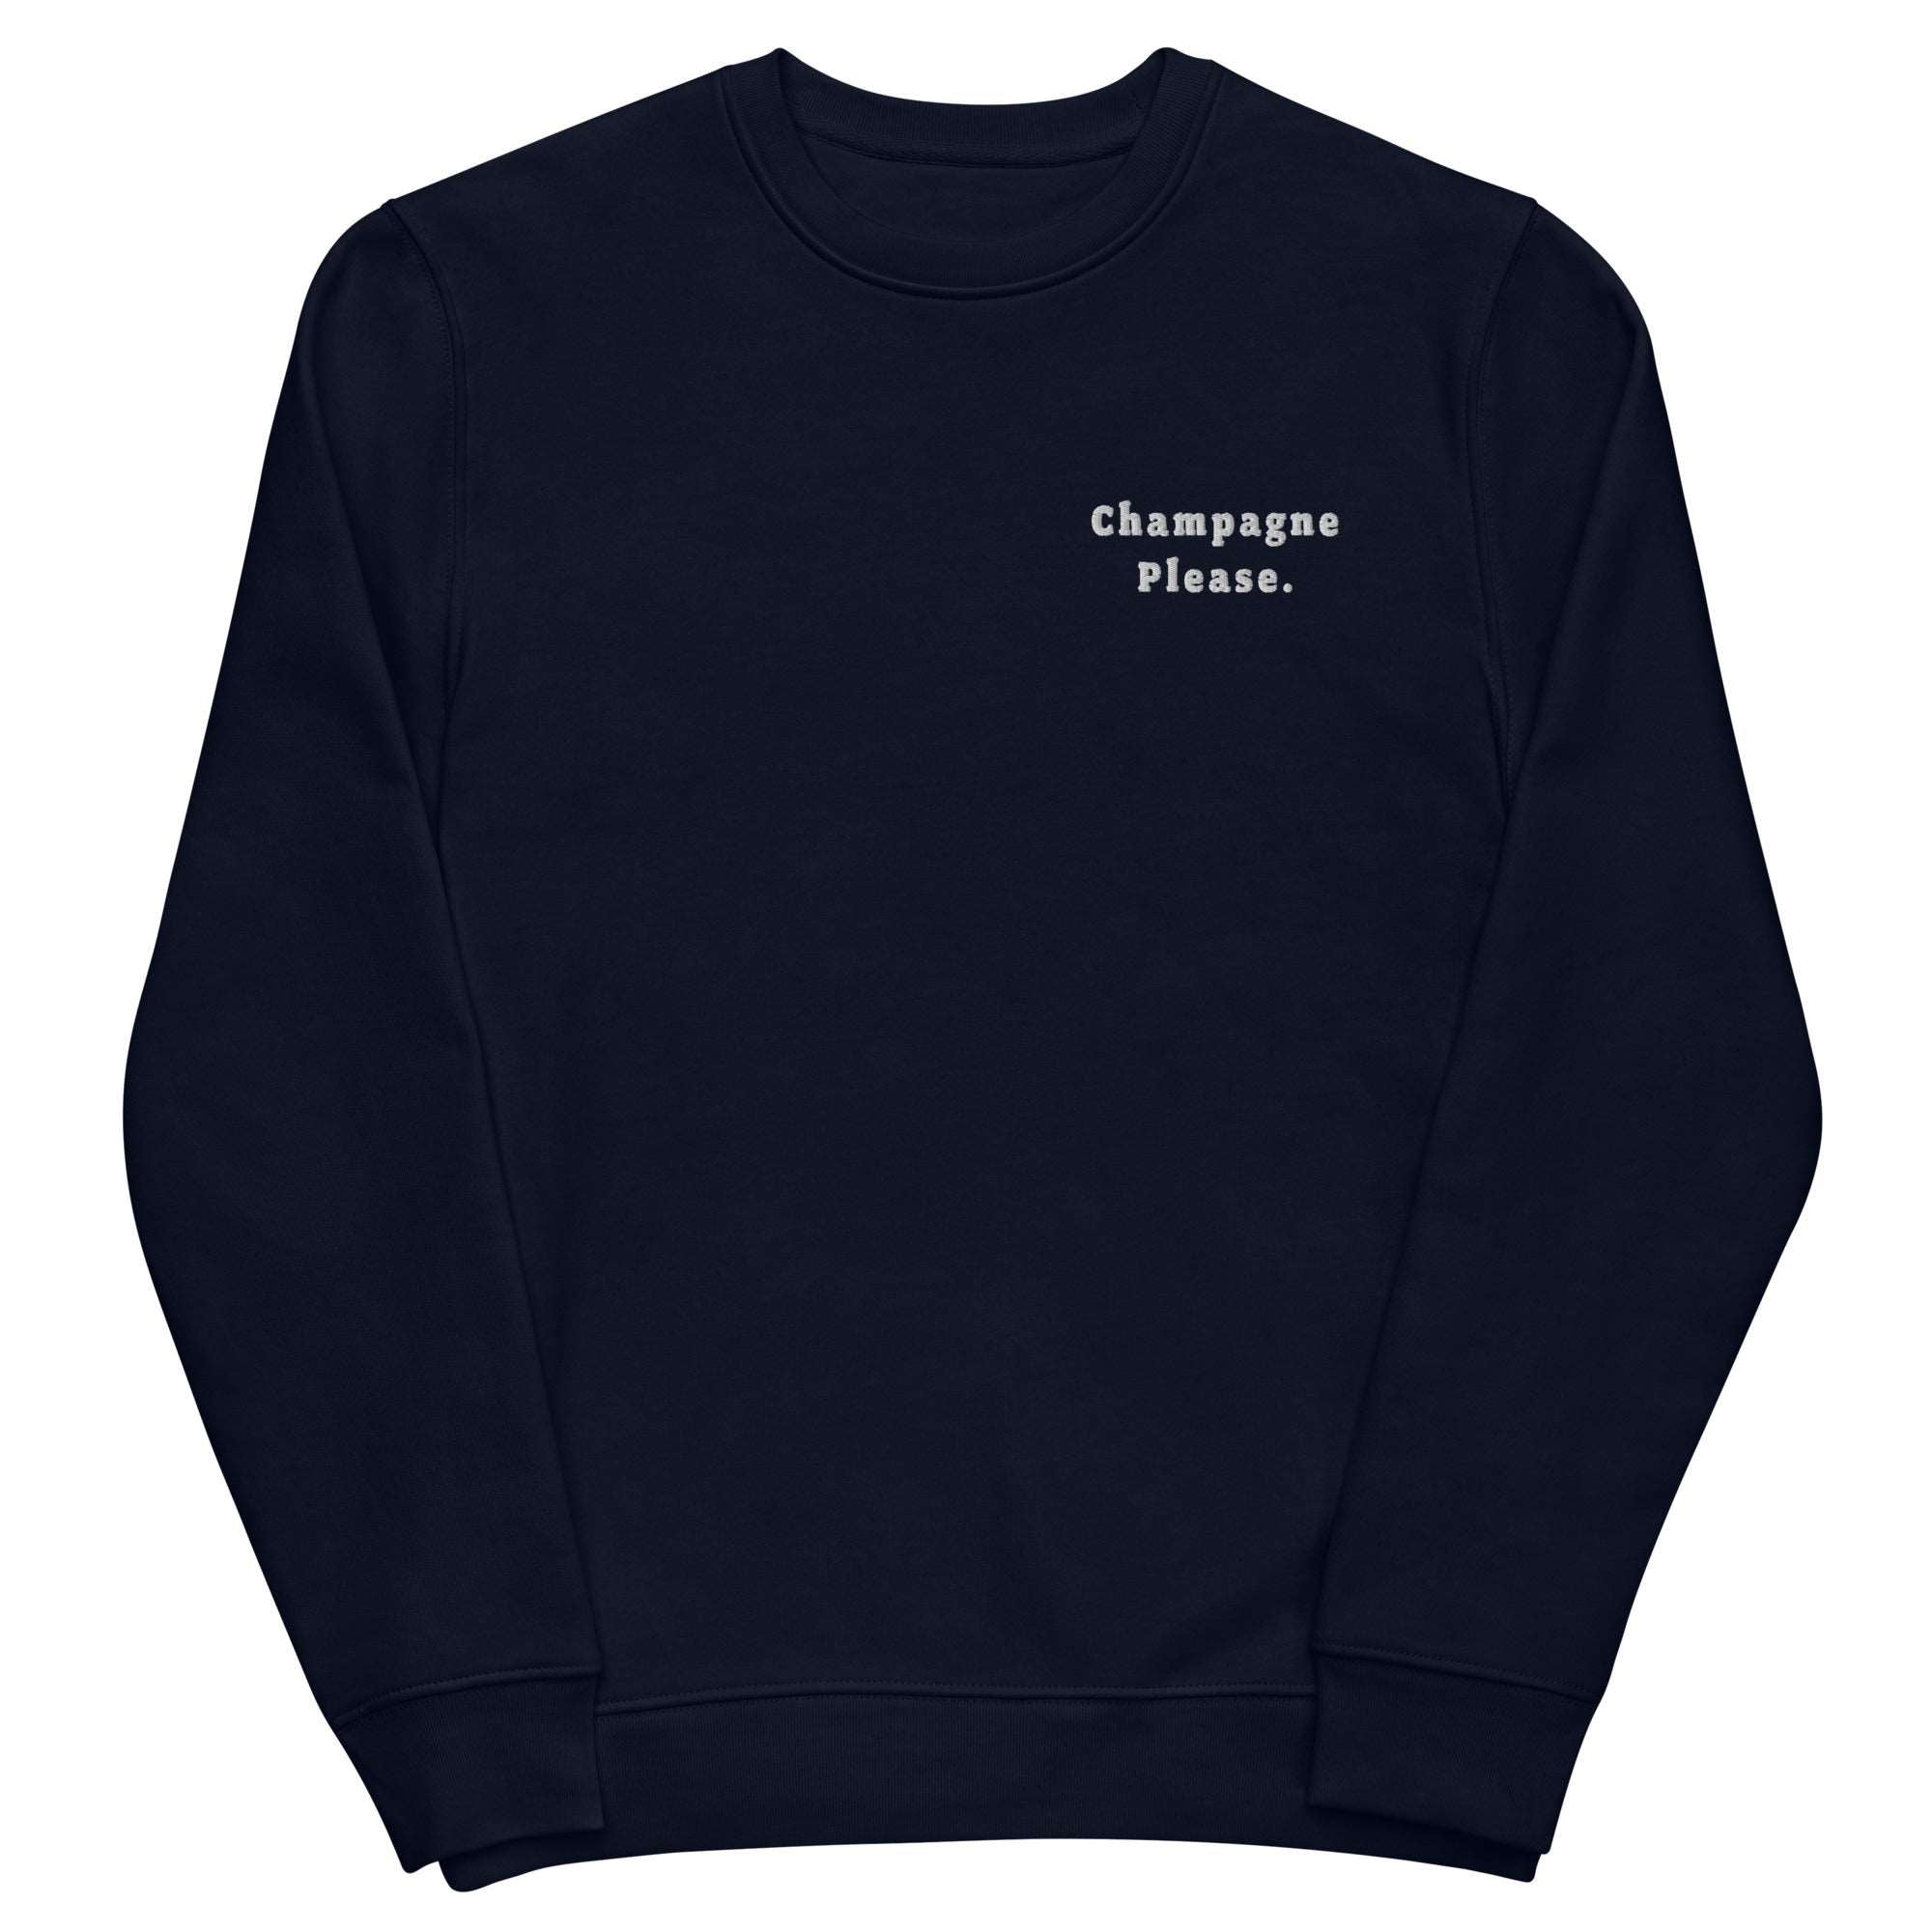 Champagne Please - Organic Embroidered Sweatshirt - The Refined Spirit